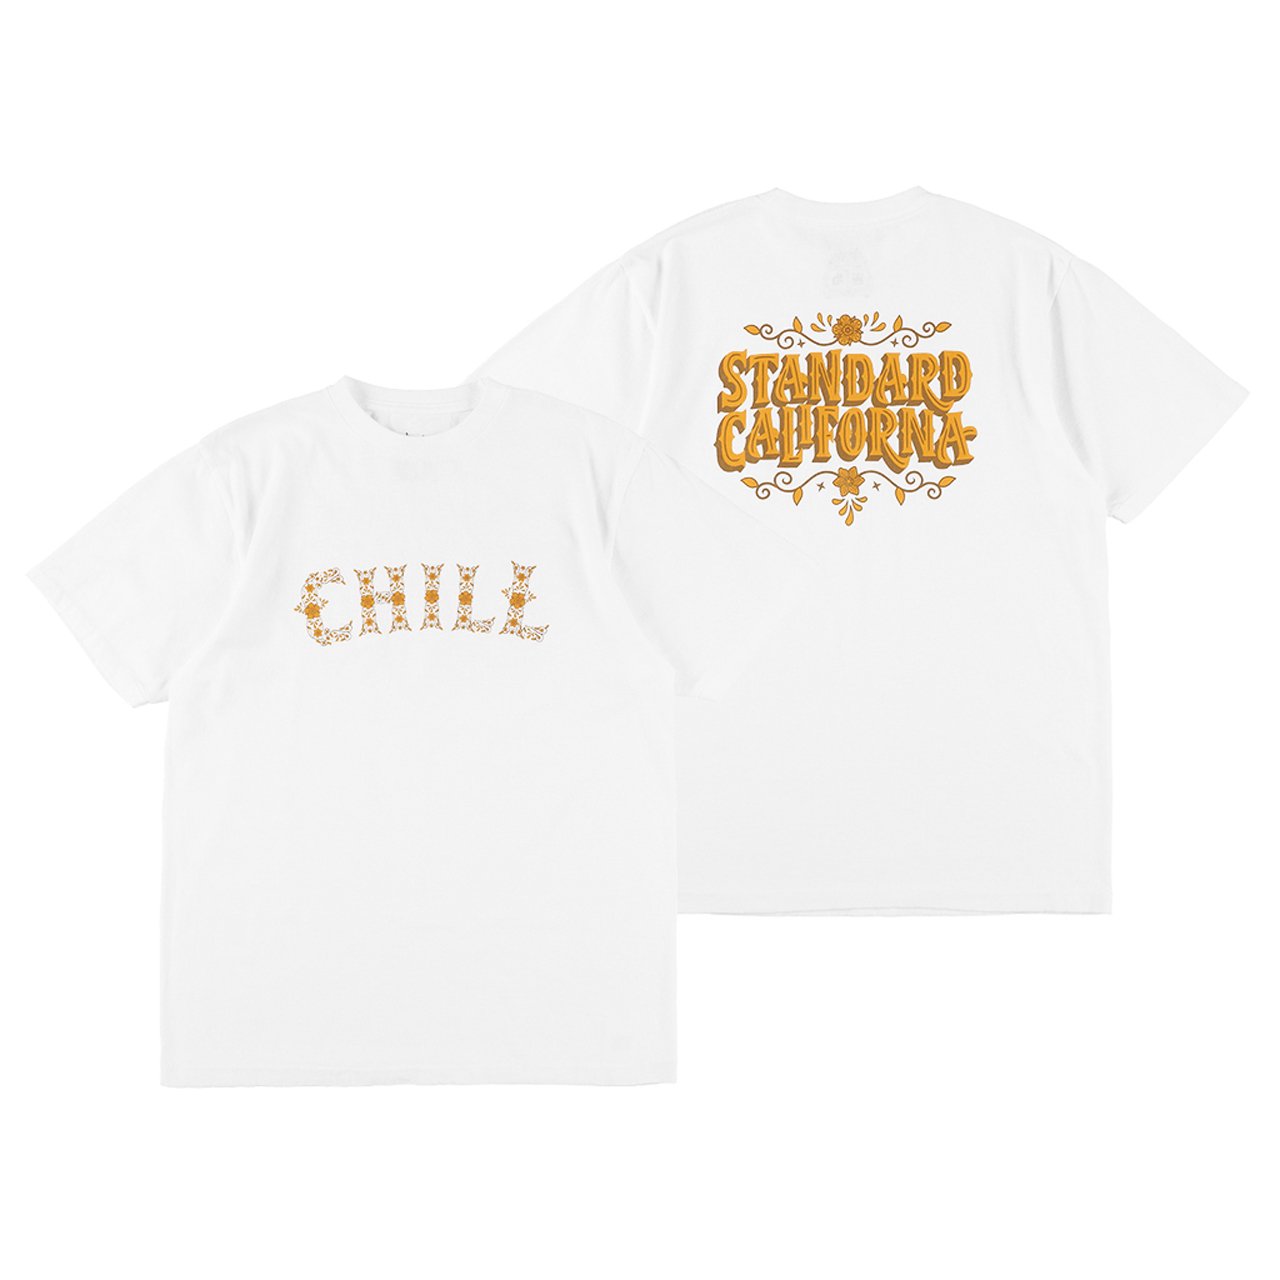 <img class='new_mark_img1' src='https://img.shop-pro.jp/img/new/icons5.gif' style='border:none;display:inline;margin:0px;padding:0px;width:auto;' />STANDARD CALIFORNIA ( ե˥)AHSD Chill Tee White